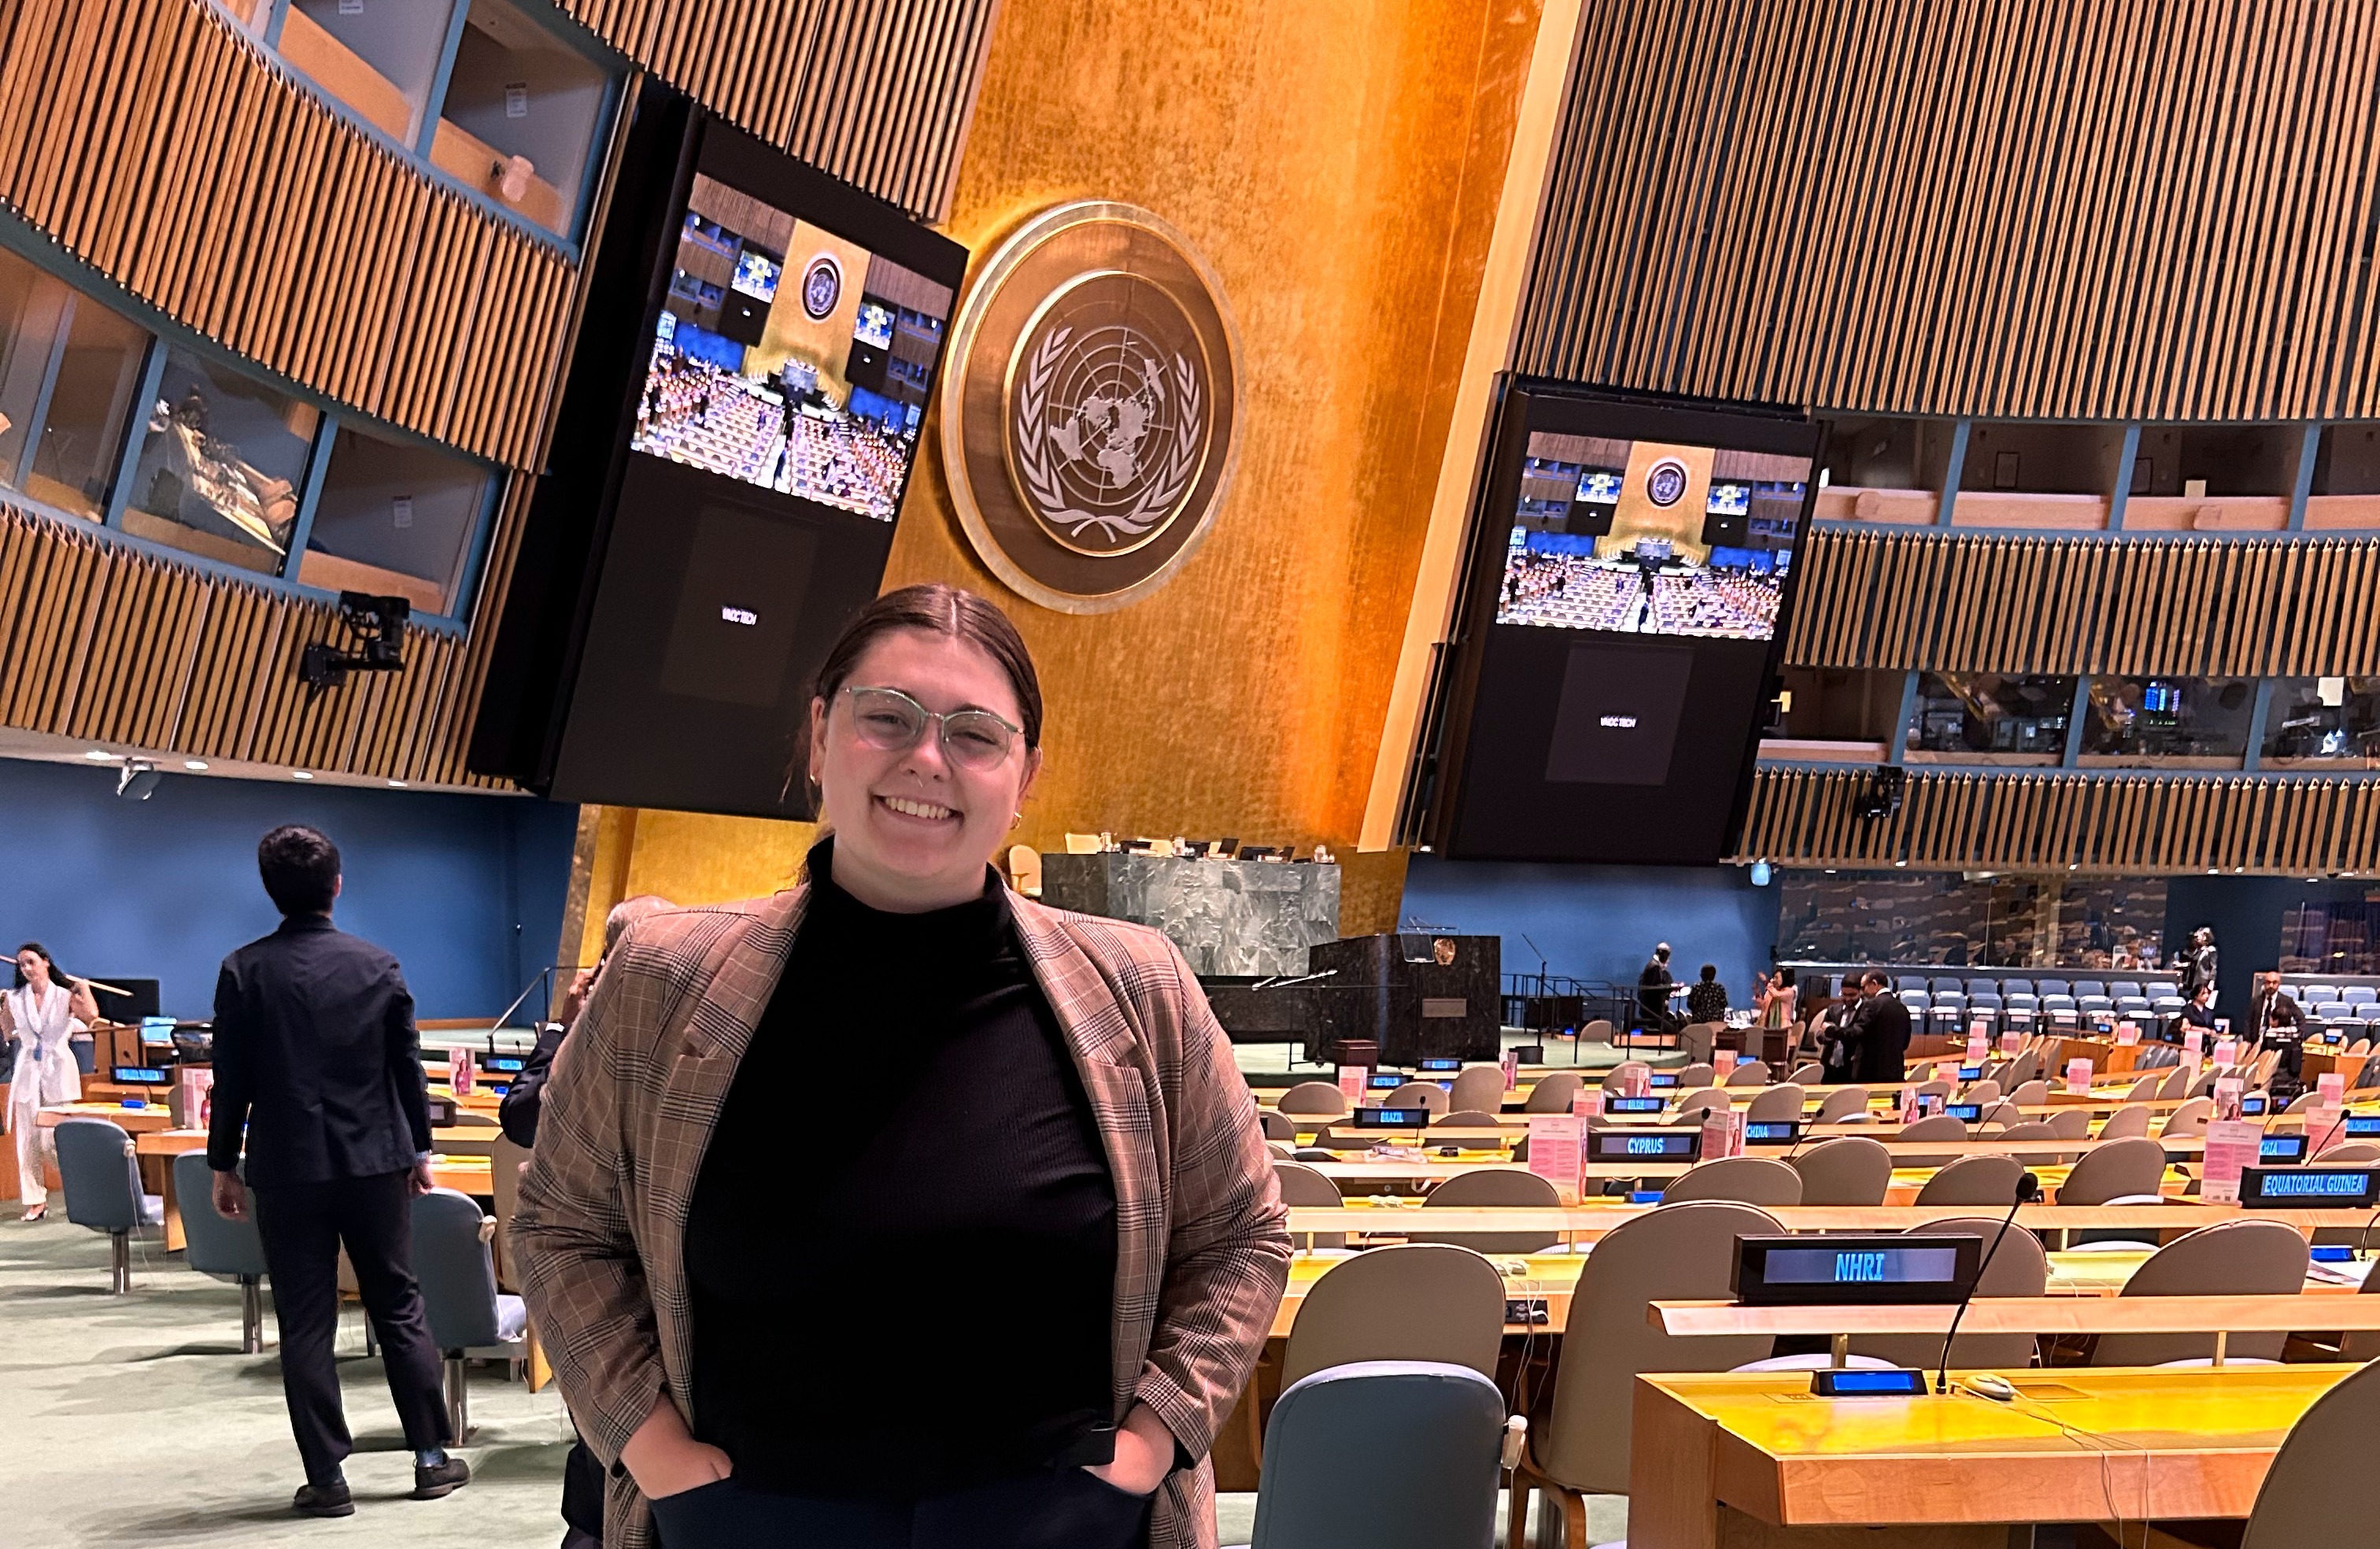 A person stands inside a meeting room inside the United Nations.